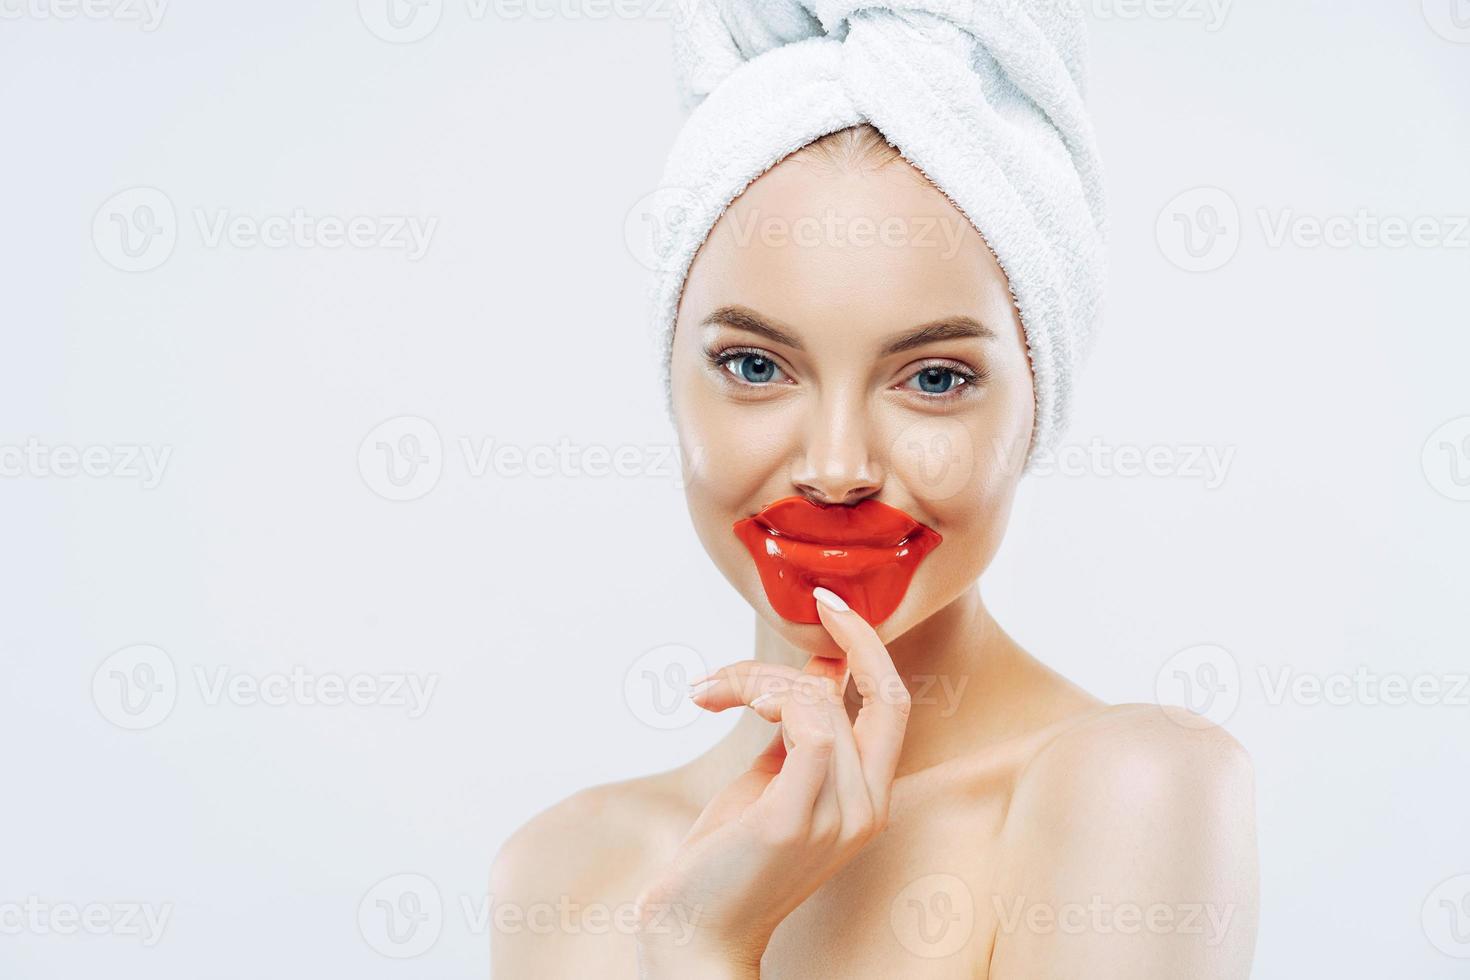 Pleasant looking healthy woman keeps patches on lips, wears towel on head, has clean pure skin after hygienic procedure, stands shirtless against white background, empty space for your advertisement photo